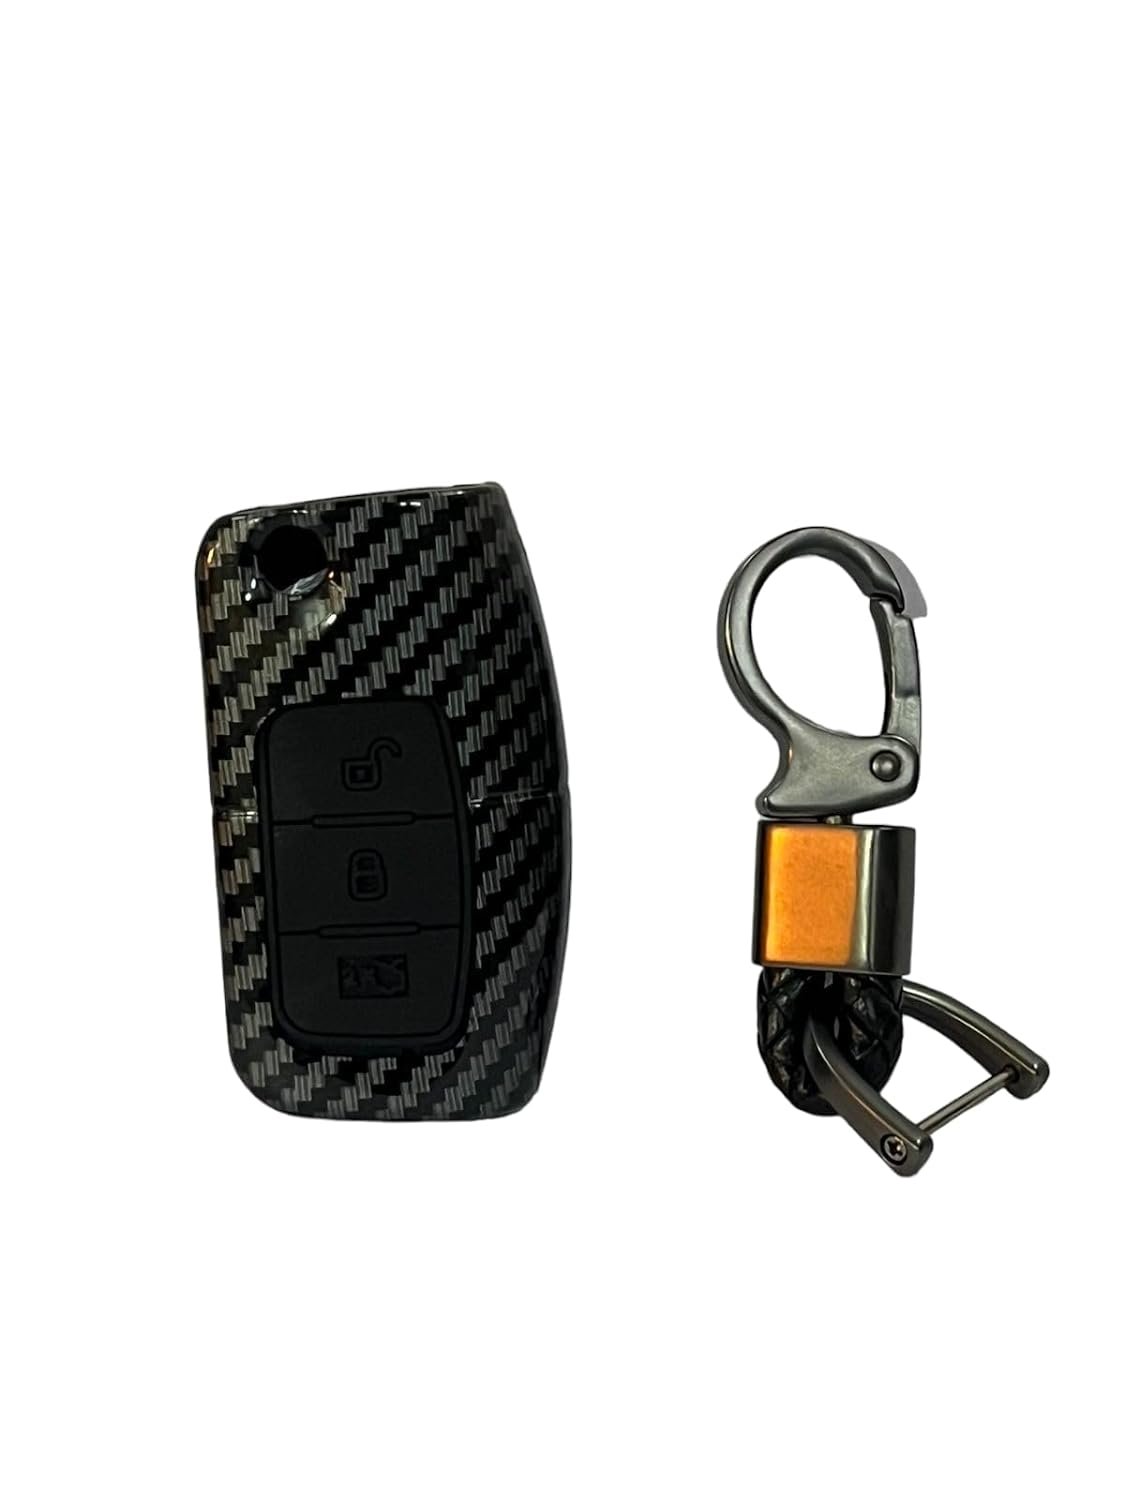 Carbon Fiber ABS Car Key Cover Compatible with Fiesta, Figo, Old Ecosport Flip Key (Key Chain Included) Image 